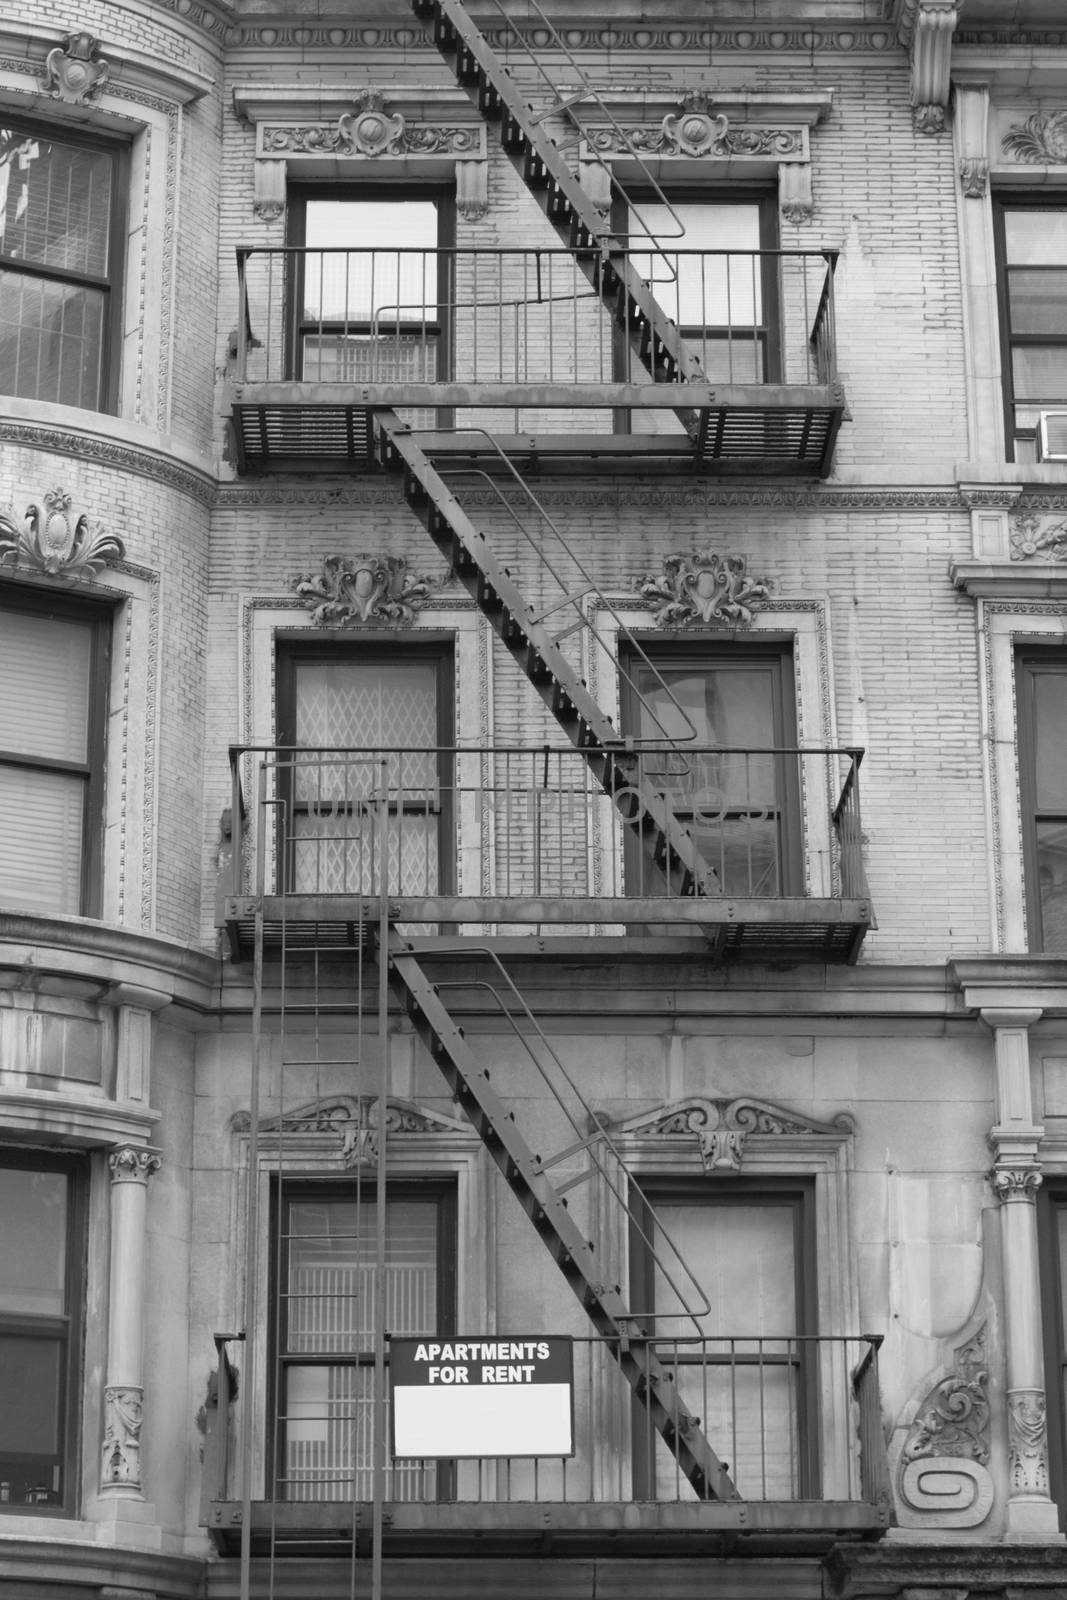 Characteristic fire escape that can be found in many areas of NYC